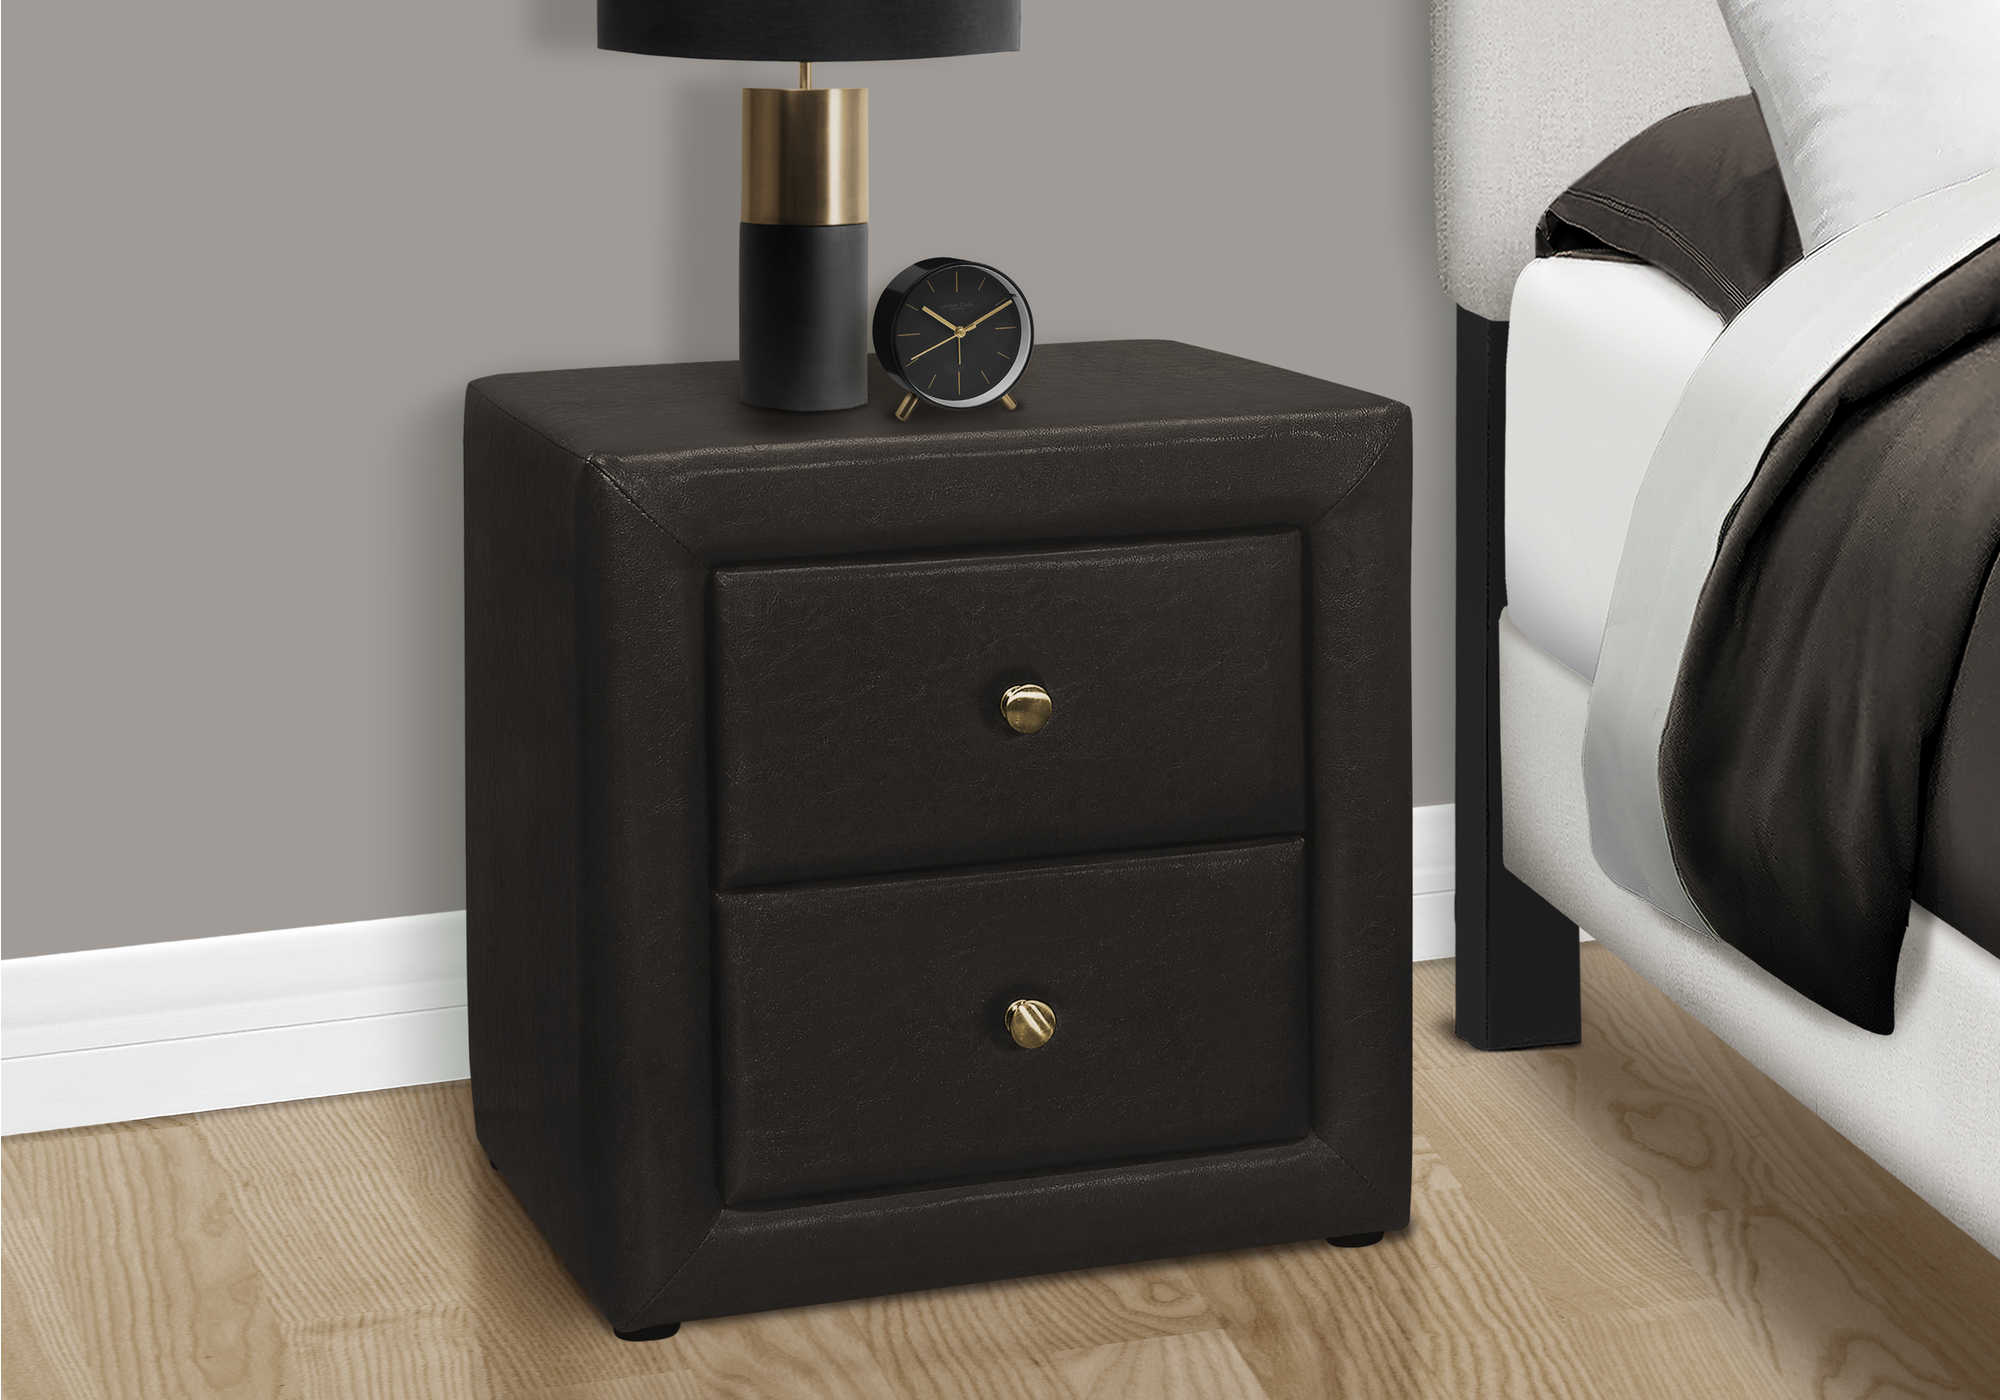 BEDROOM ACCENT - 21"H / BROWN LEATHER-LOOK NIGHT STAND